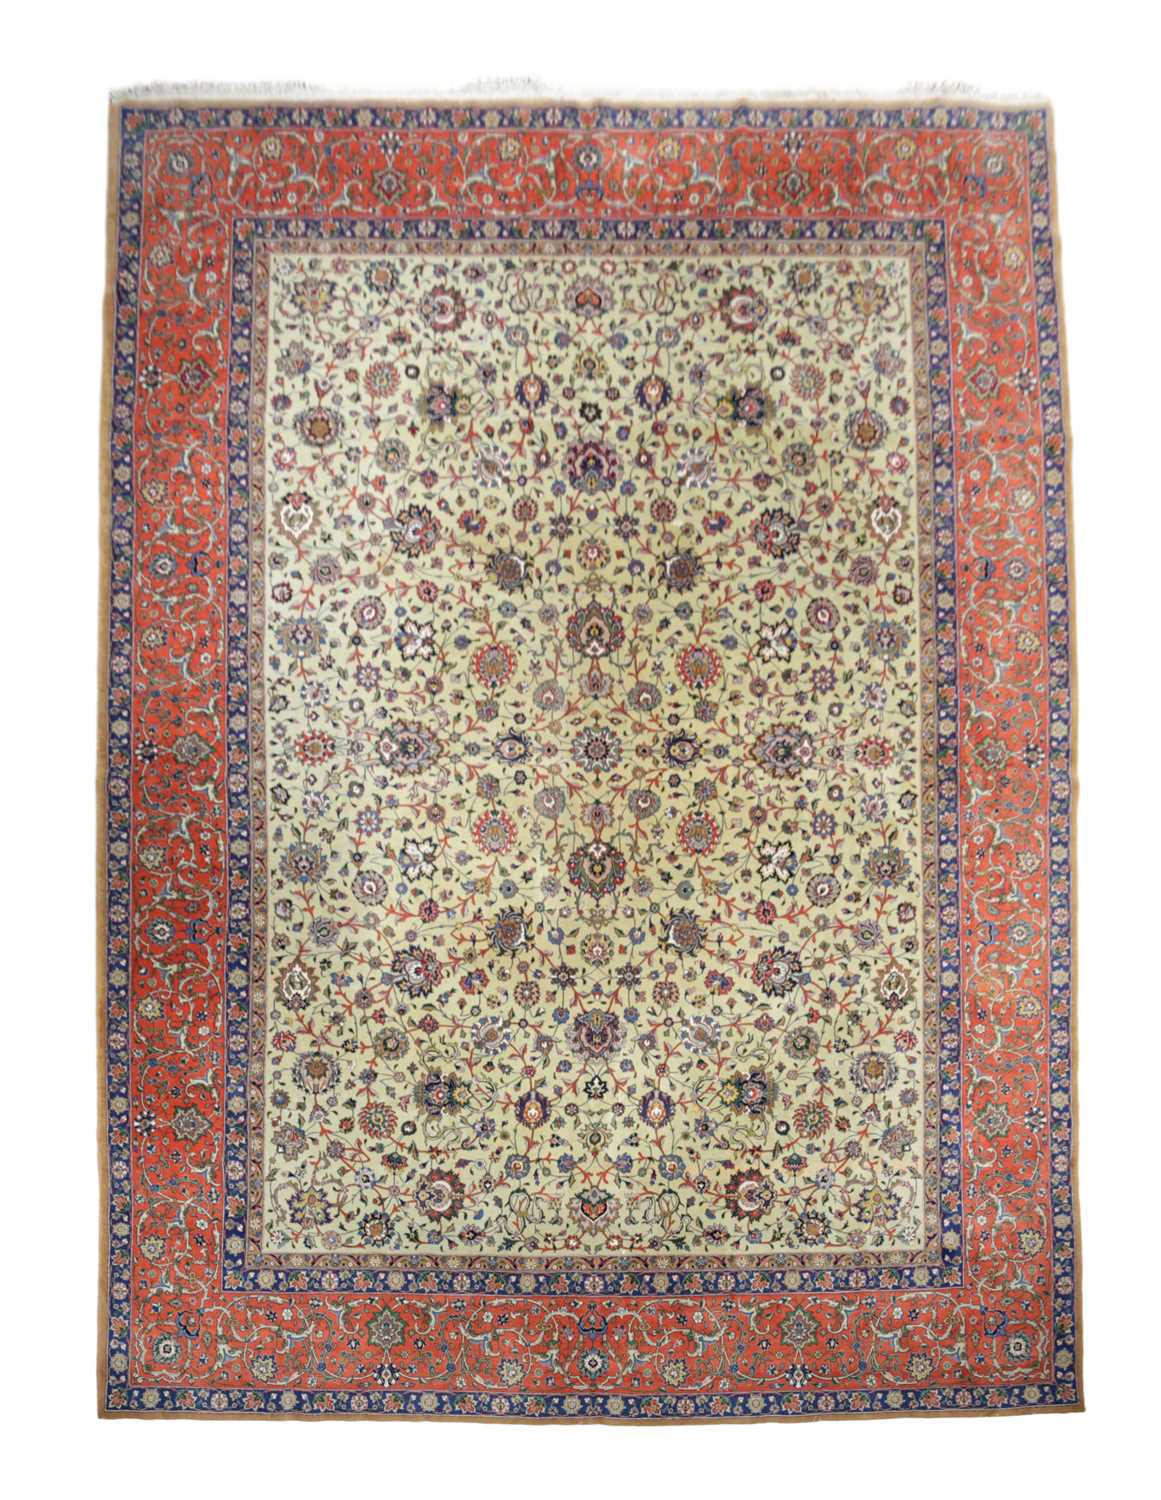 A FINE PERSIAN CARPET PROBABLY TABRIZ, NORTH WEST PERSIA, C.1950 the pale celadon field with an